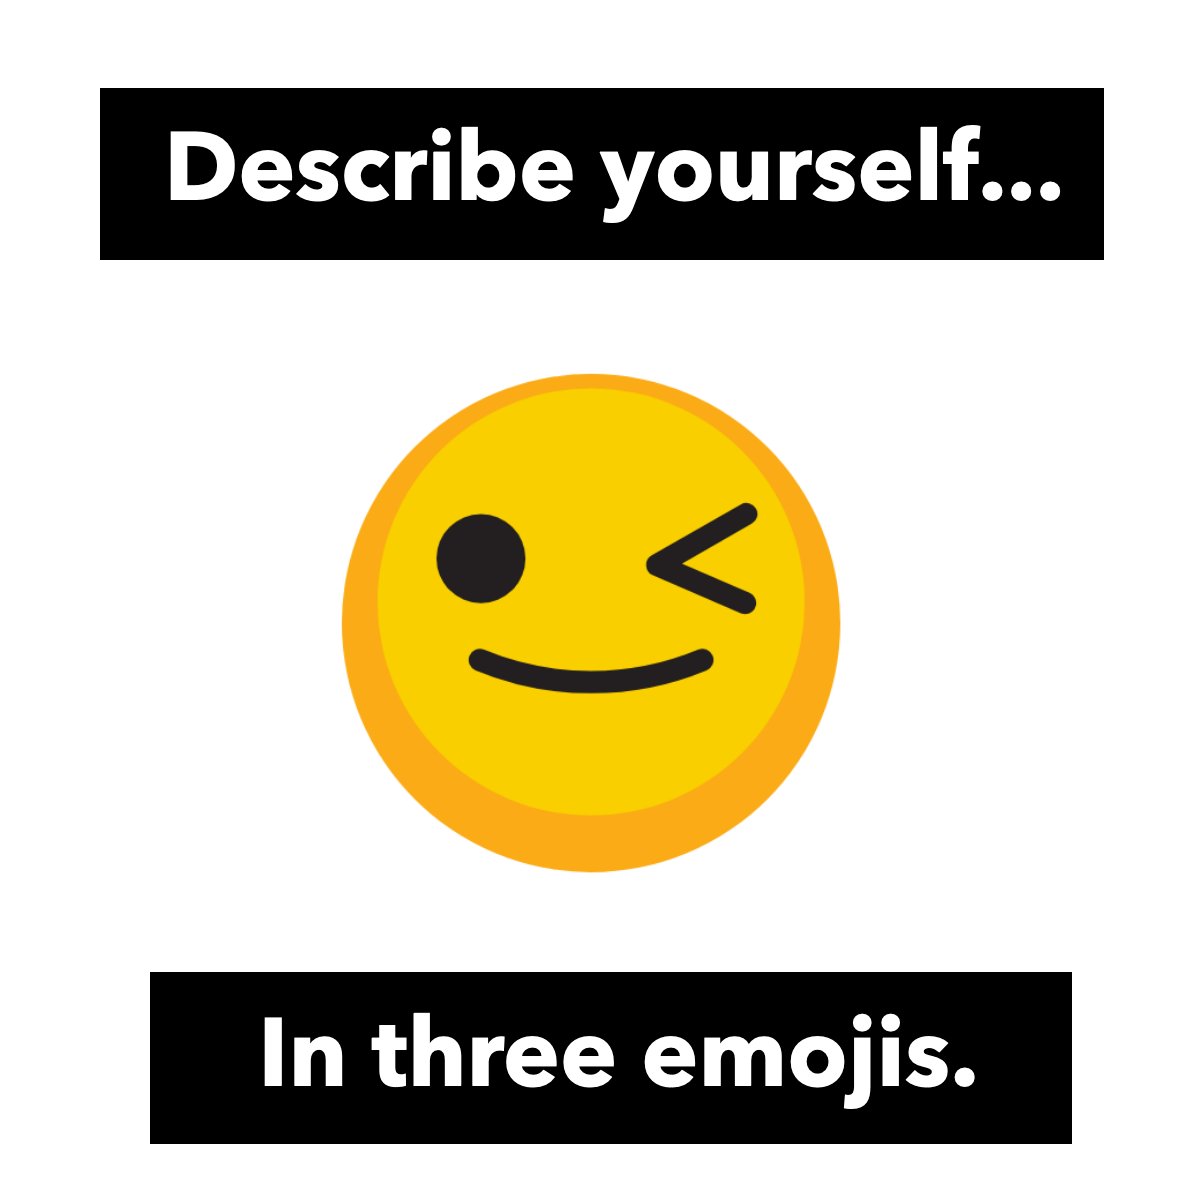 Remember, you can only use three. 🤯

#describeyourself #emojis #tellmeaboutyou #emojibattle 
 #mkehomes #mkeliving #withyouonyourjourneyhome